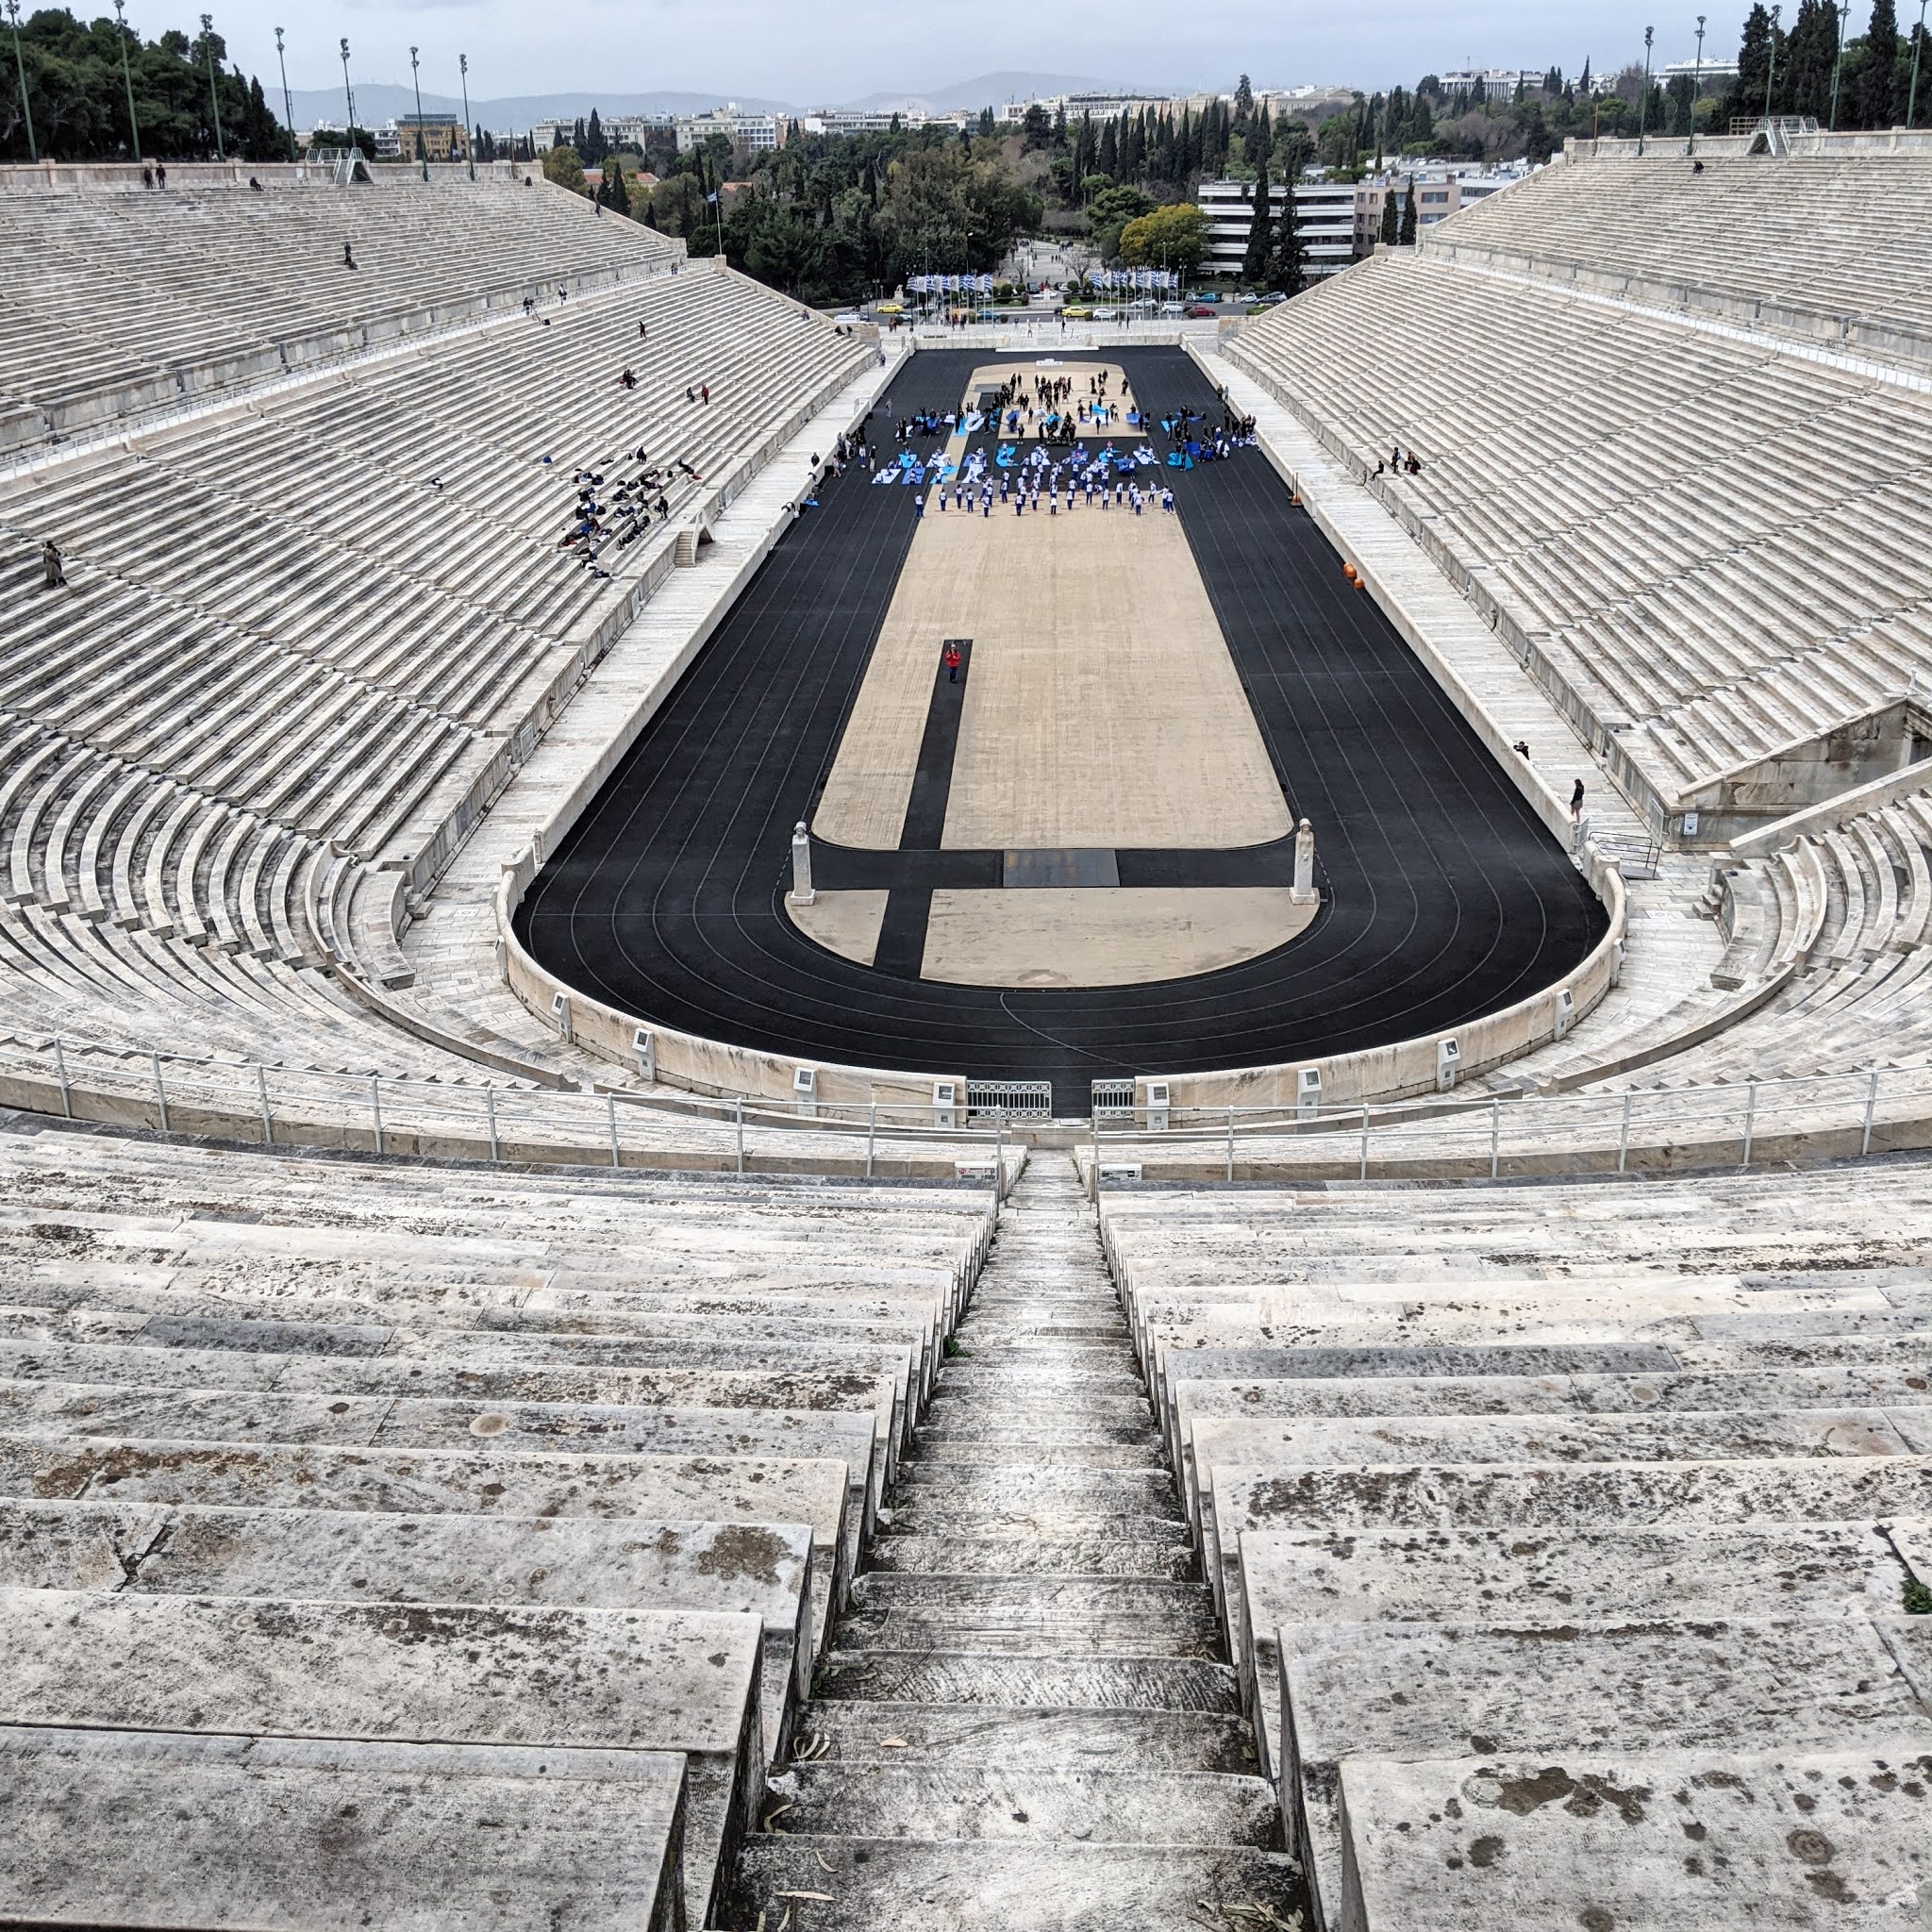 The Panathenaic Stadium in athens with a few people milling around on the steps and track. The monumental stadium is one of the best things to see during a weekend in athens